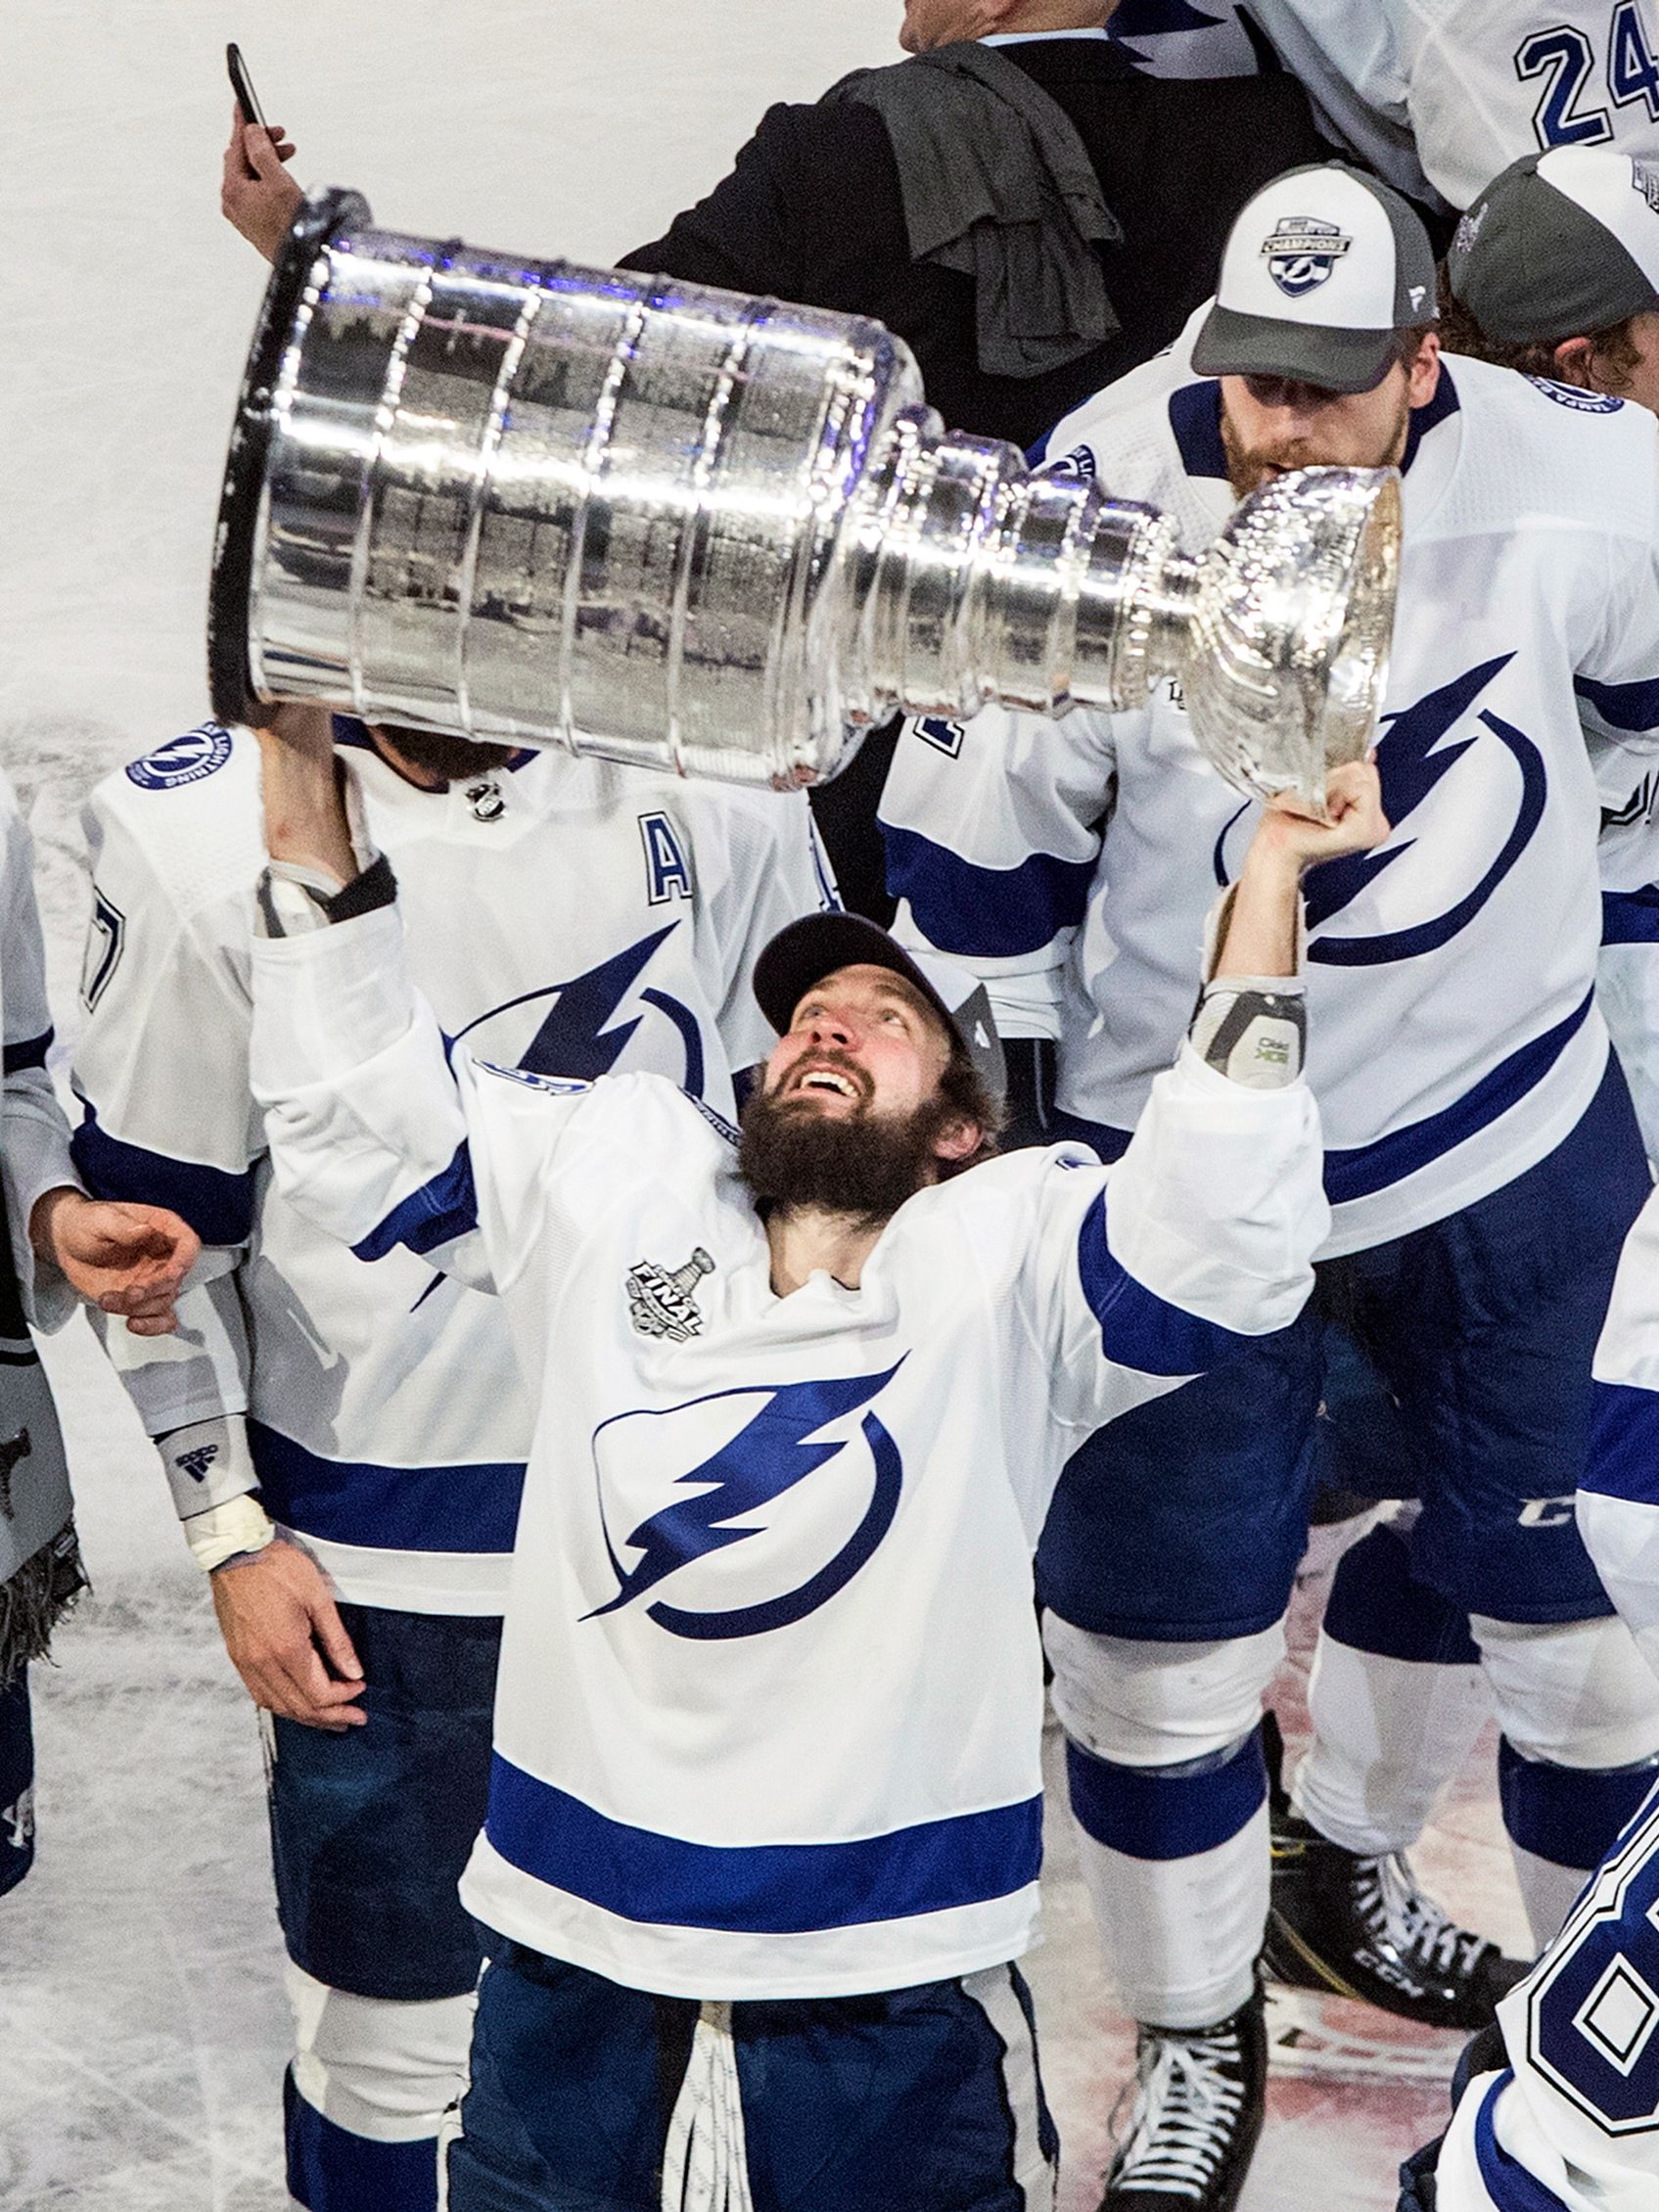 Tampa Bay Lightning win the NHL's Stanley Cup | CNN